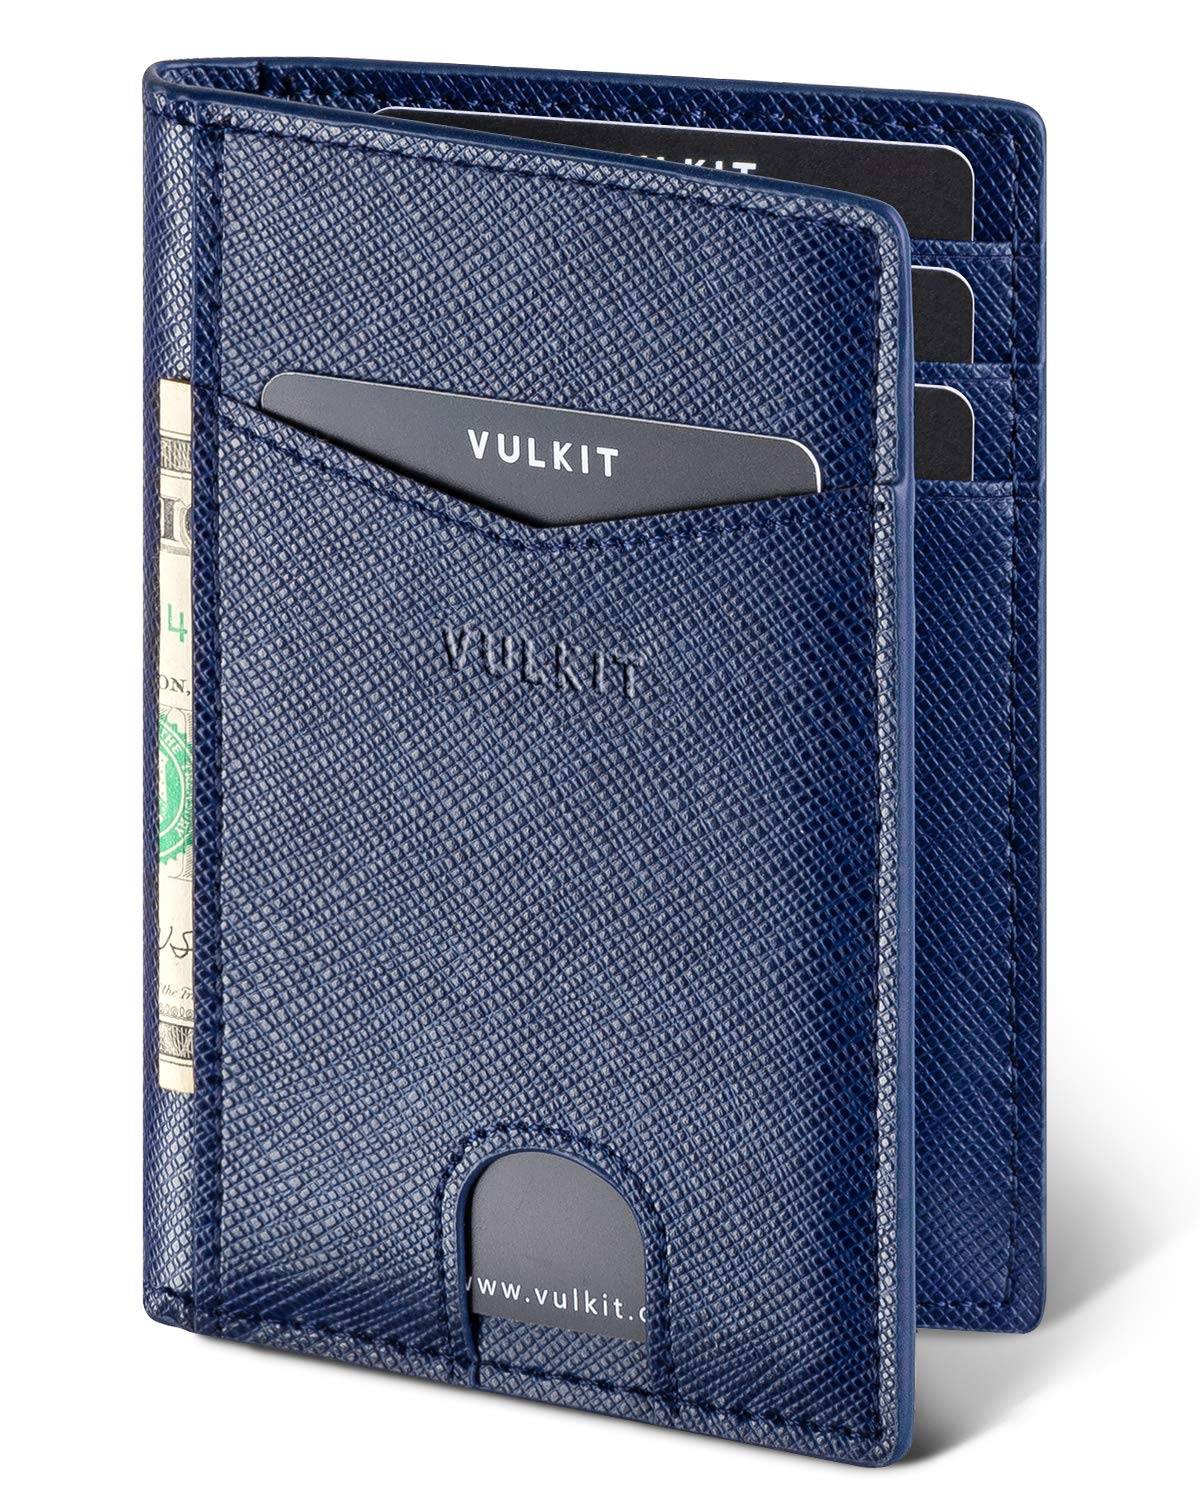 VULKIT Credit Card Holder RFID Blocking Slim Leather Wallet Anti Scan Bank Card Holder Quick Access with 10 Slots (Cross Navy)